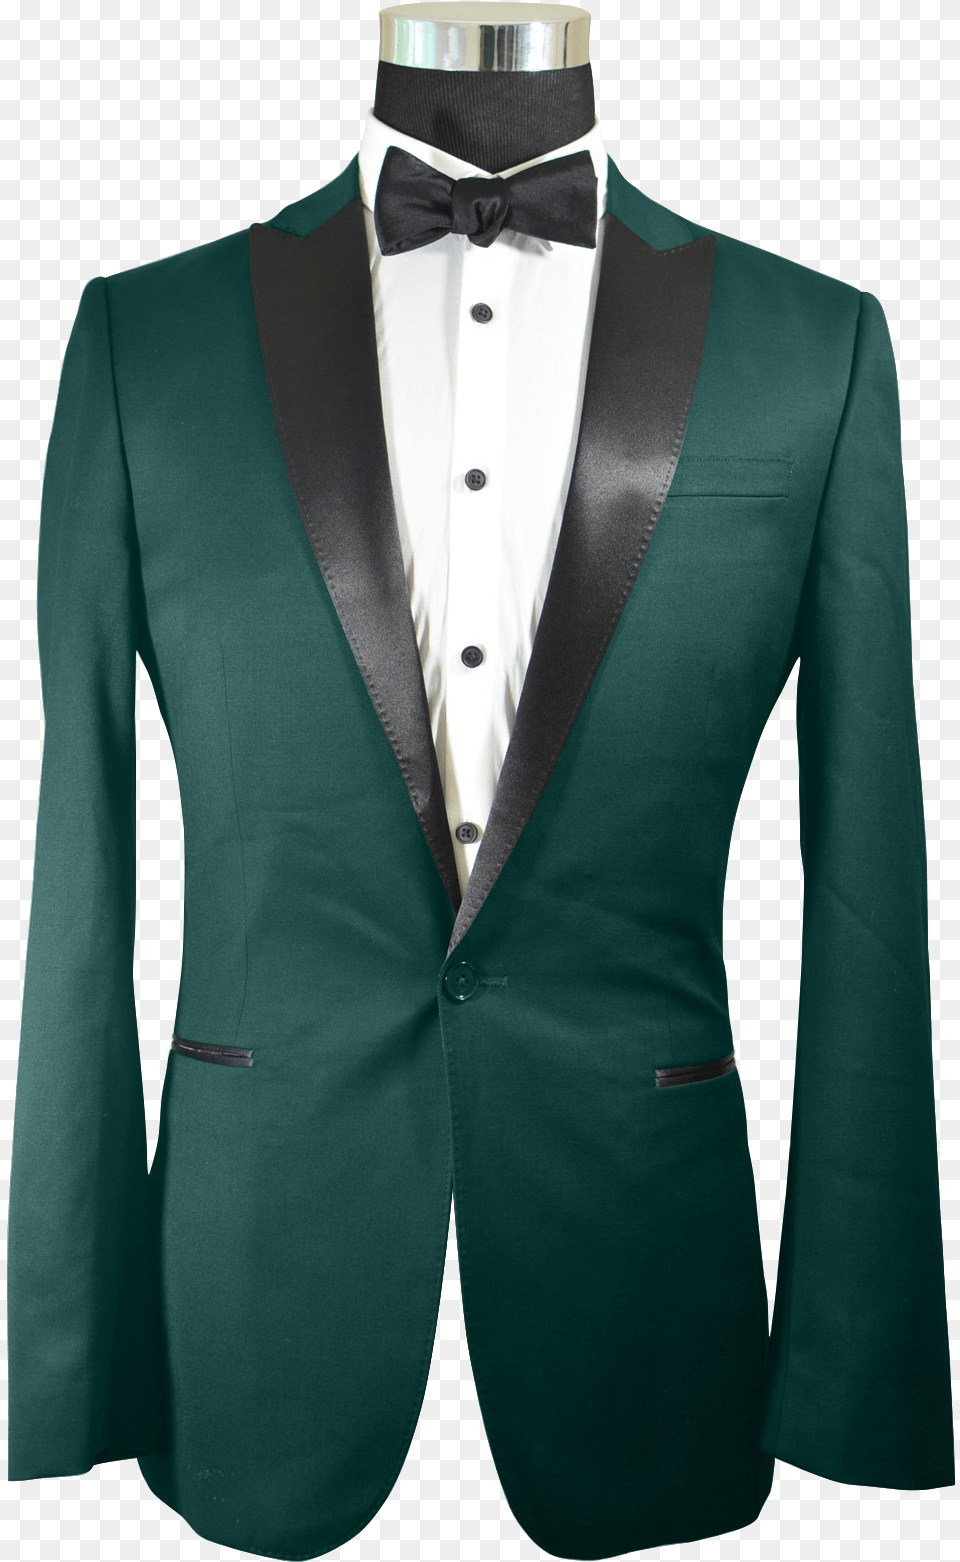 The Regal Forest Green Tuxedo Tuxedo, Accessories, Clothing, Formal Wear, Suit Png Image